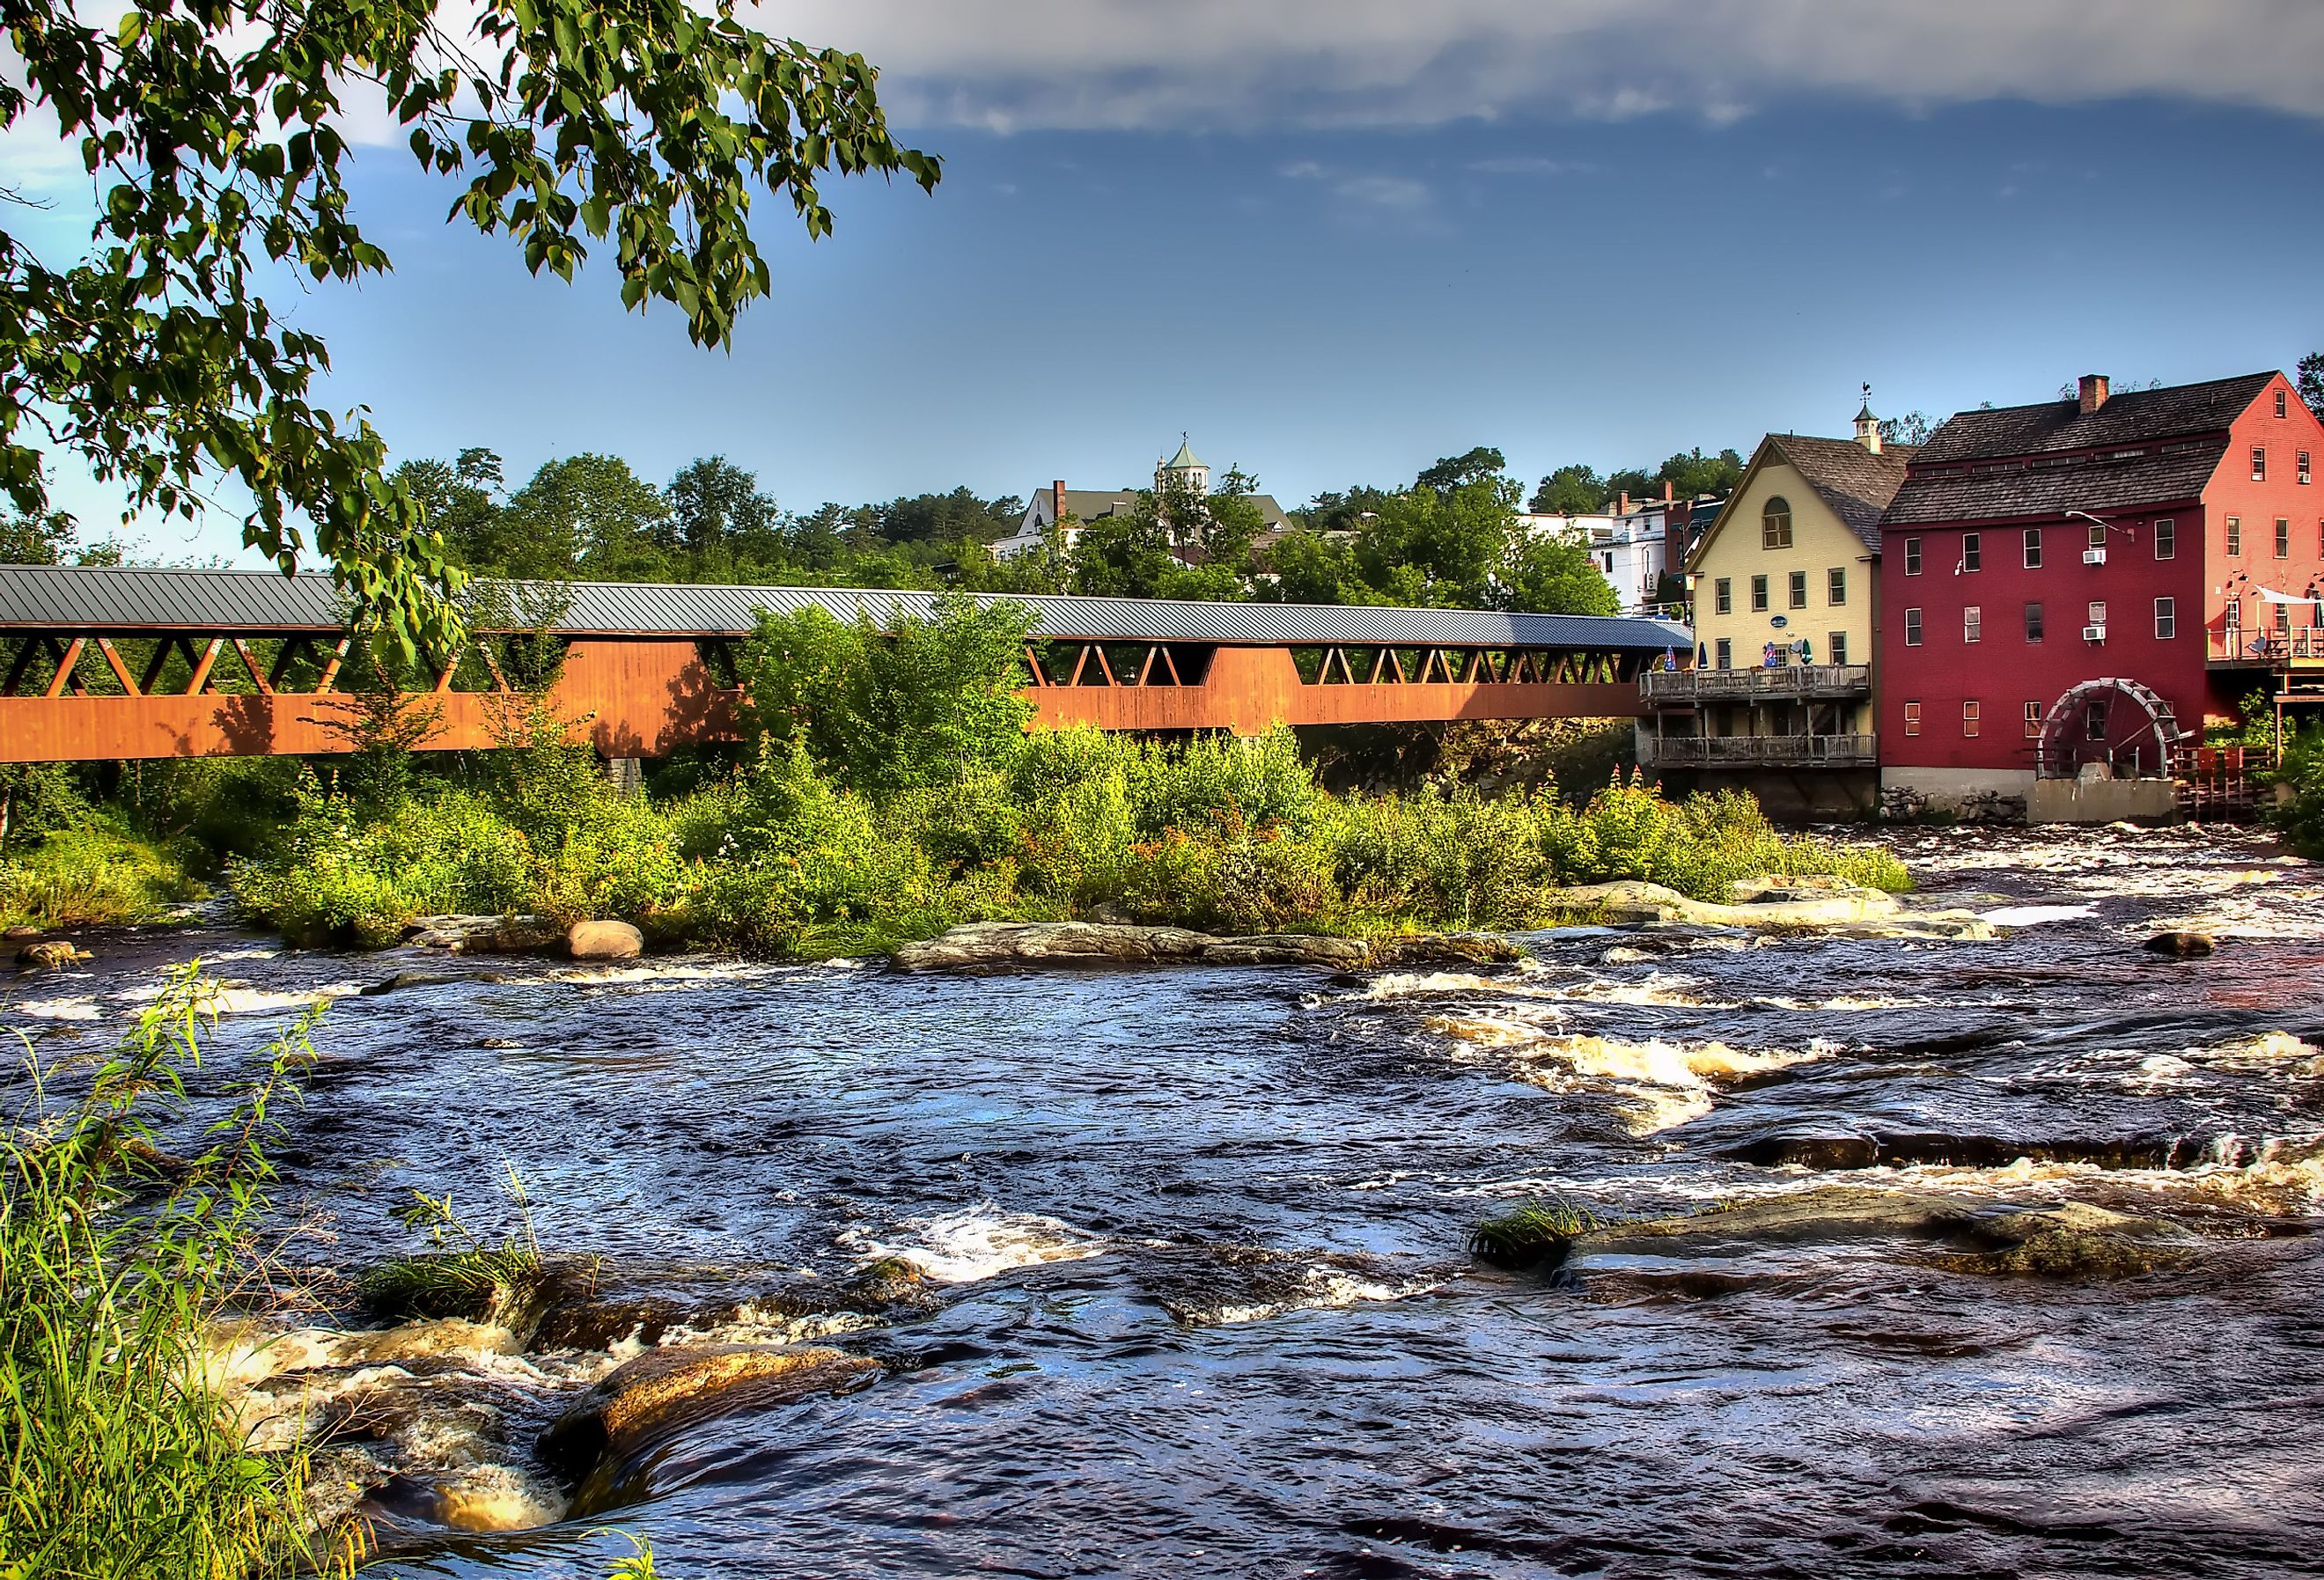 The River Walk overed bridge with the Grist Mill on the Ammonoosuc River in Littleton, New Hampshire.